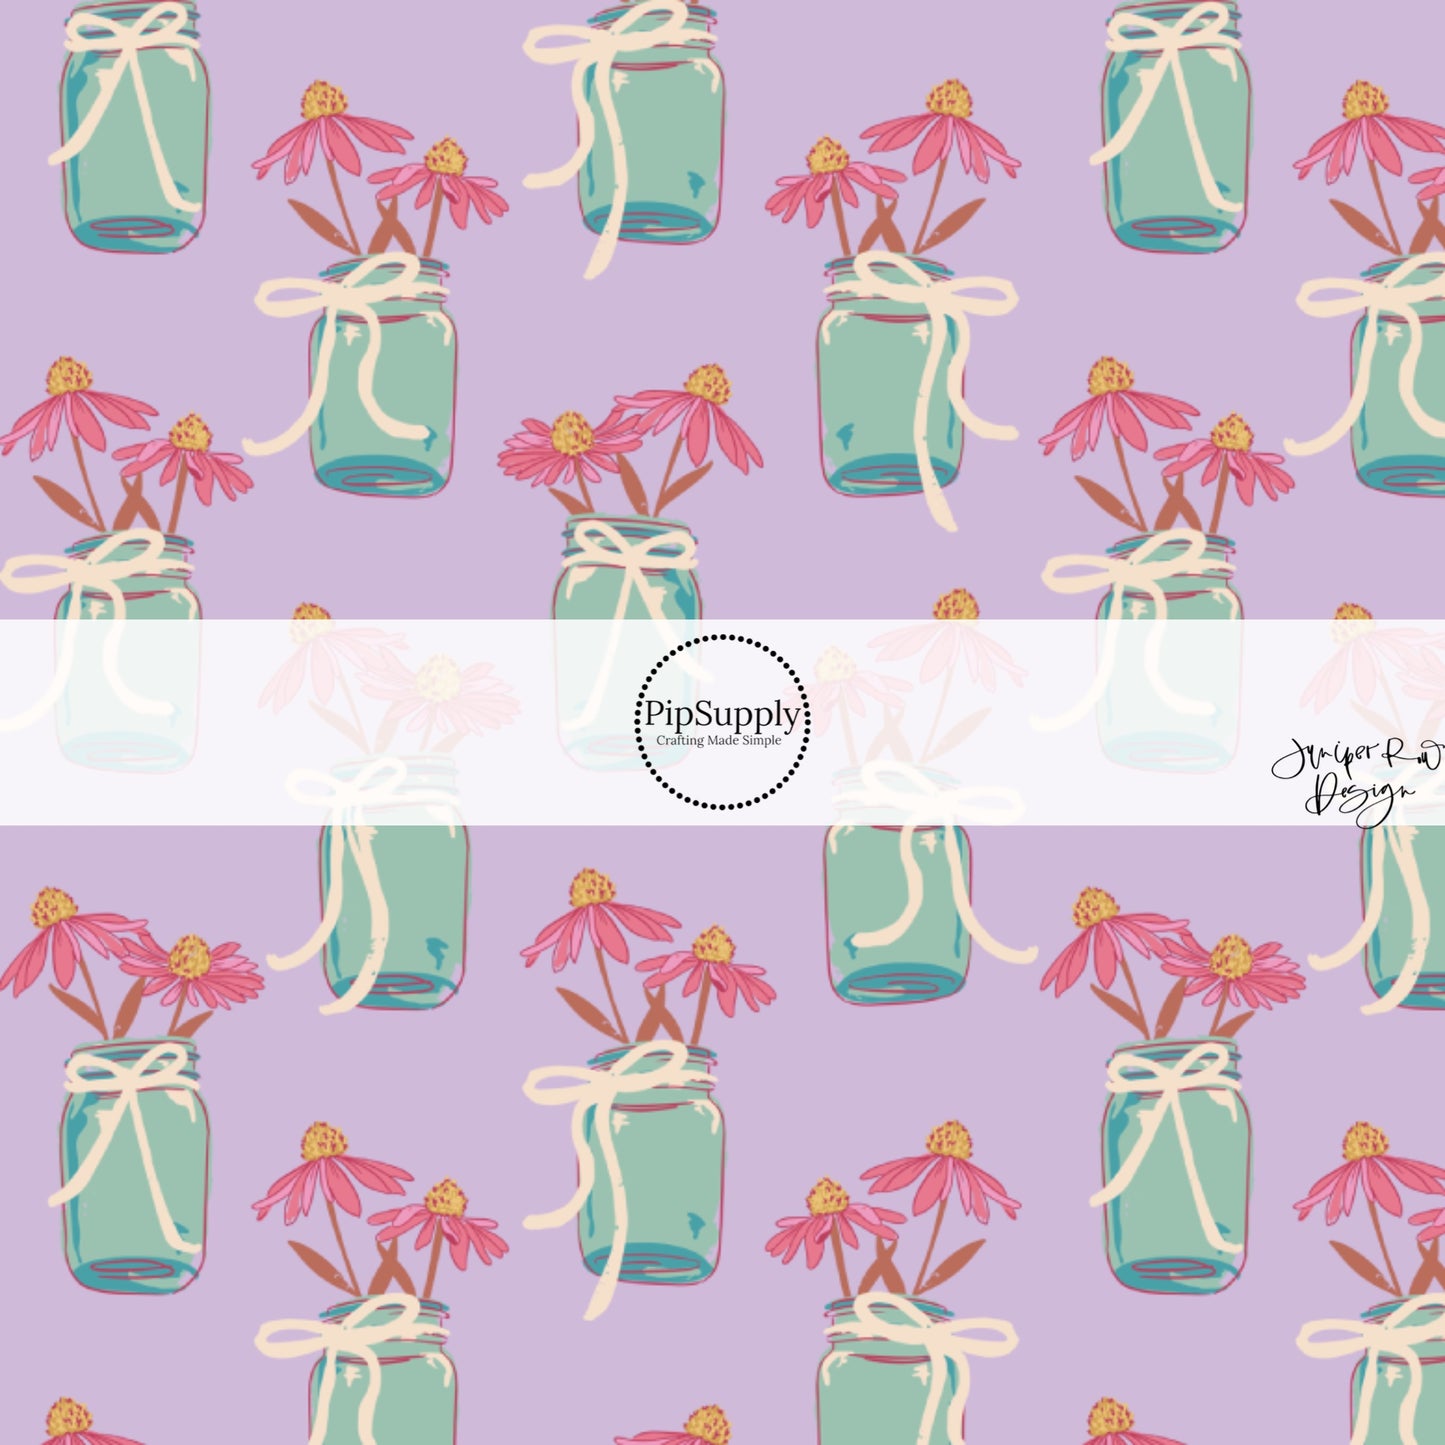 This summer fabric by the yard features flowers in a mason jar on purple. This fun summer themed fabric can be used for all your sewing and crafting needs!